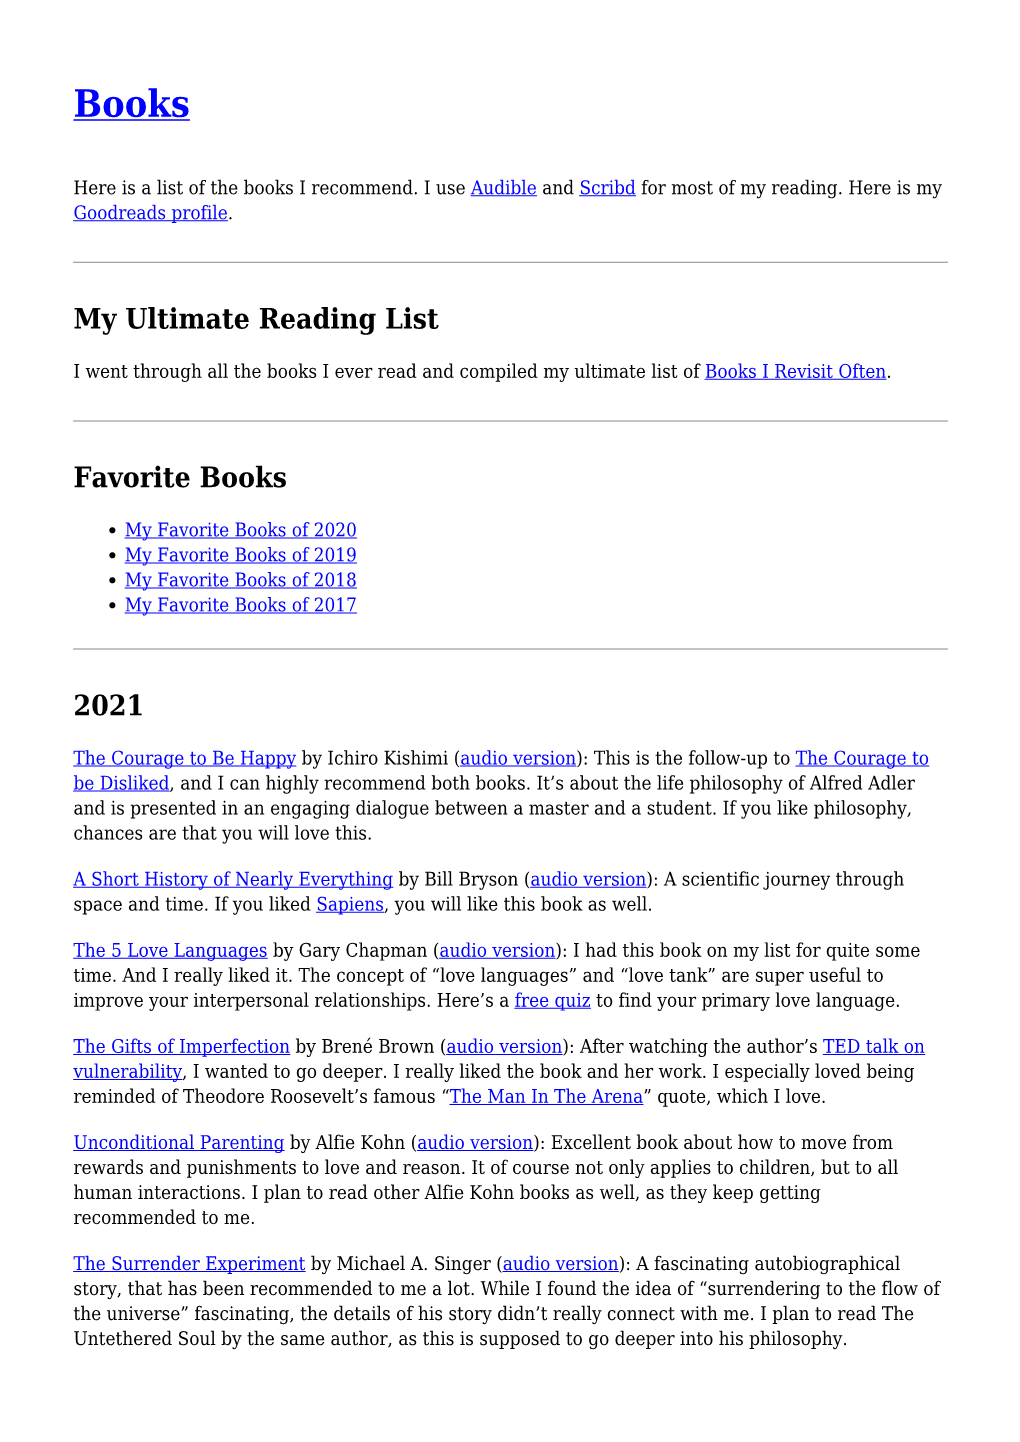 My Ultimate Reading List Favorite Books 2021